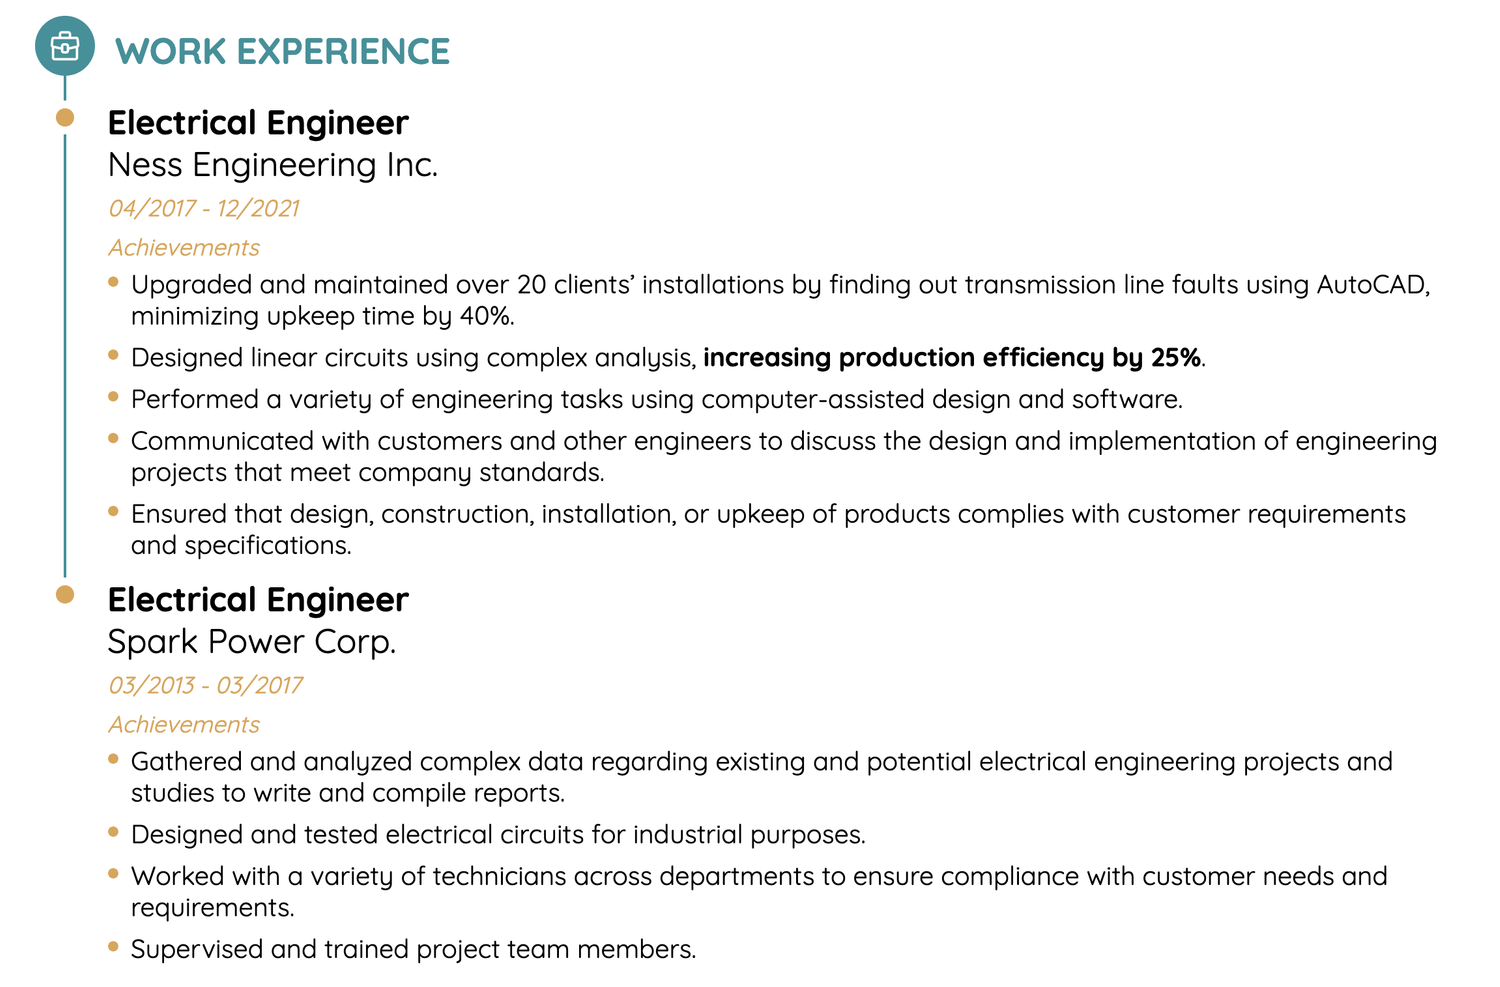 work experience for electrical engineer resume